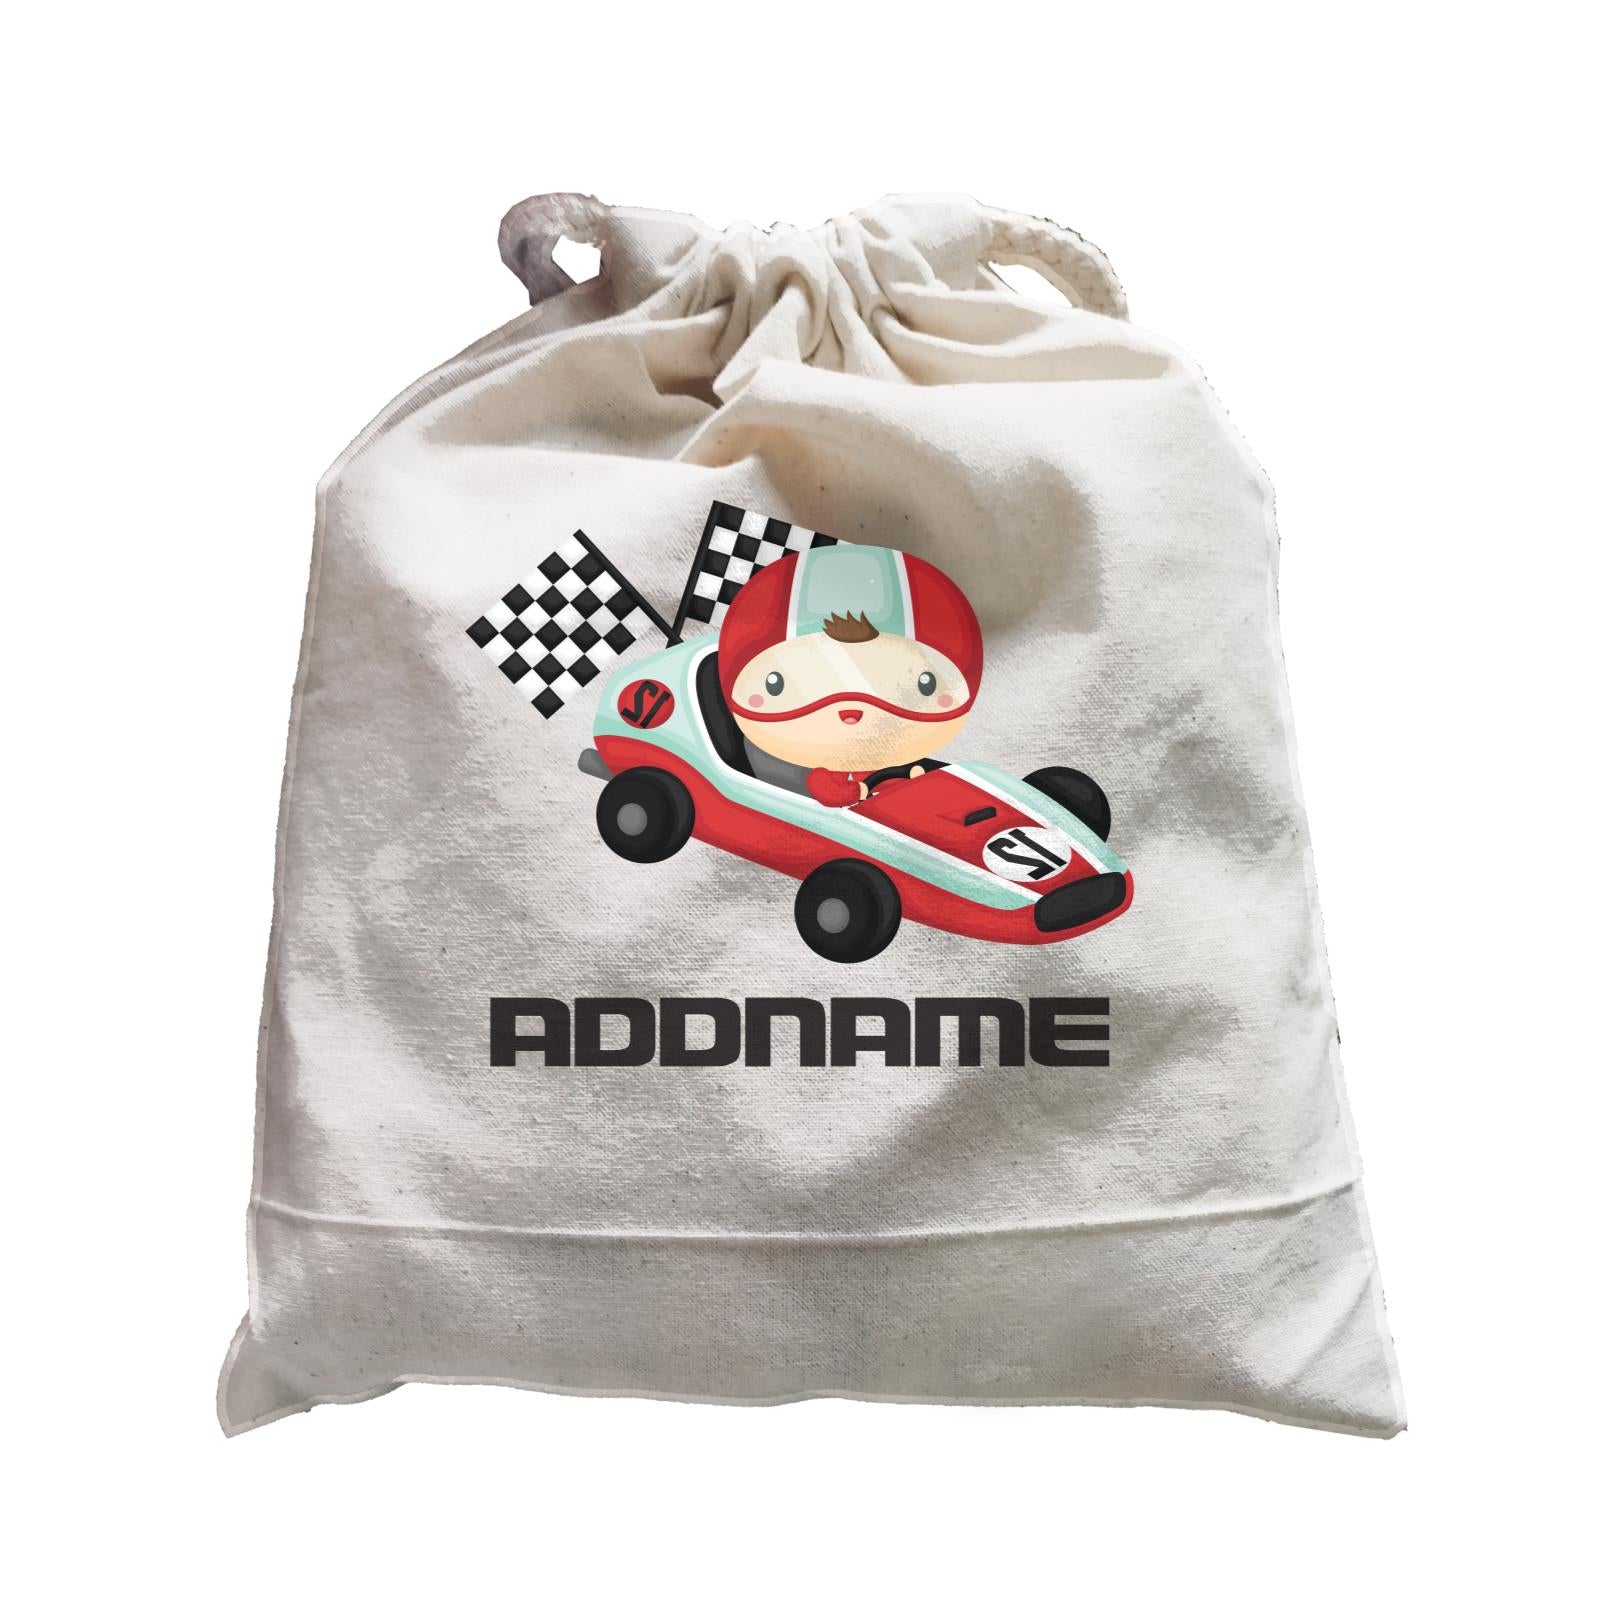 Birthday Cars Race Racer Boy With Racing Cars Addname Satchel